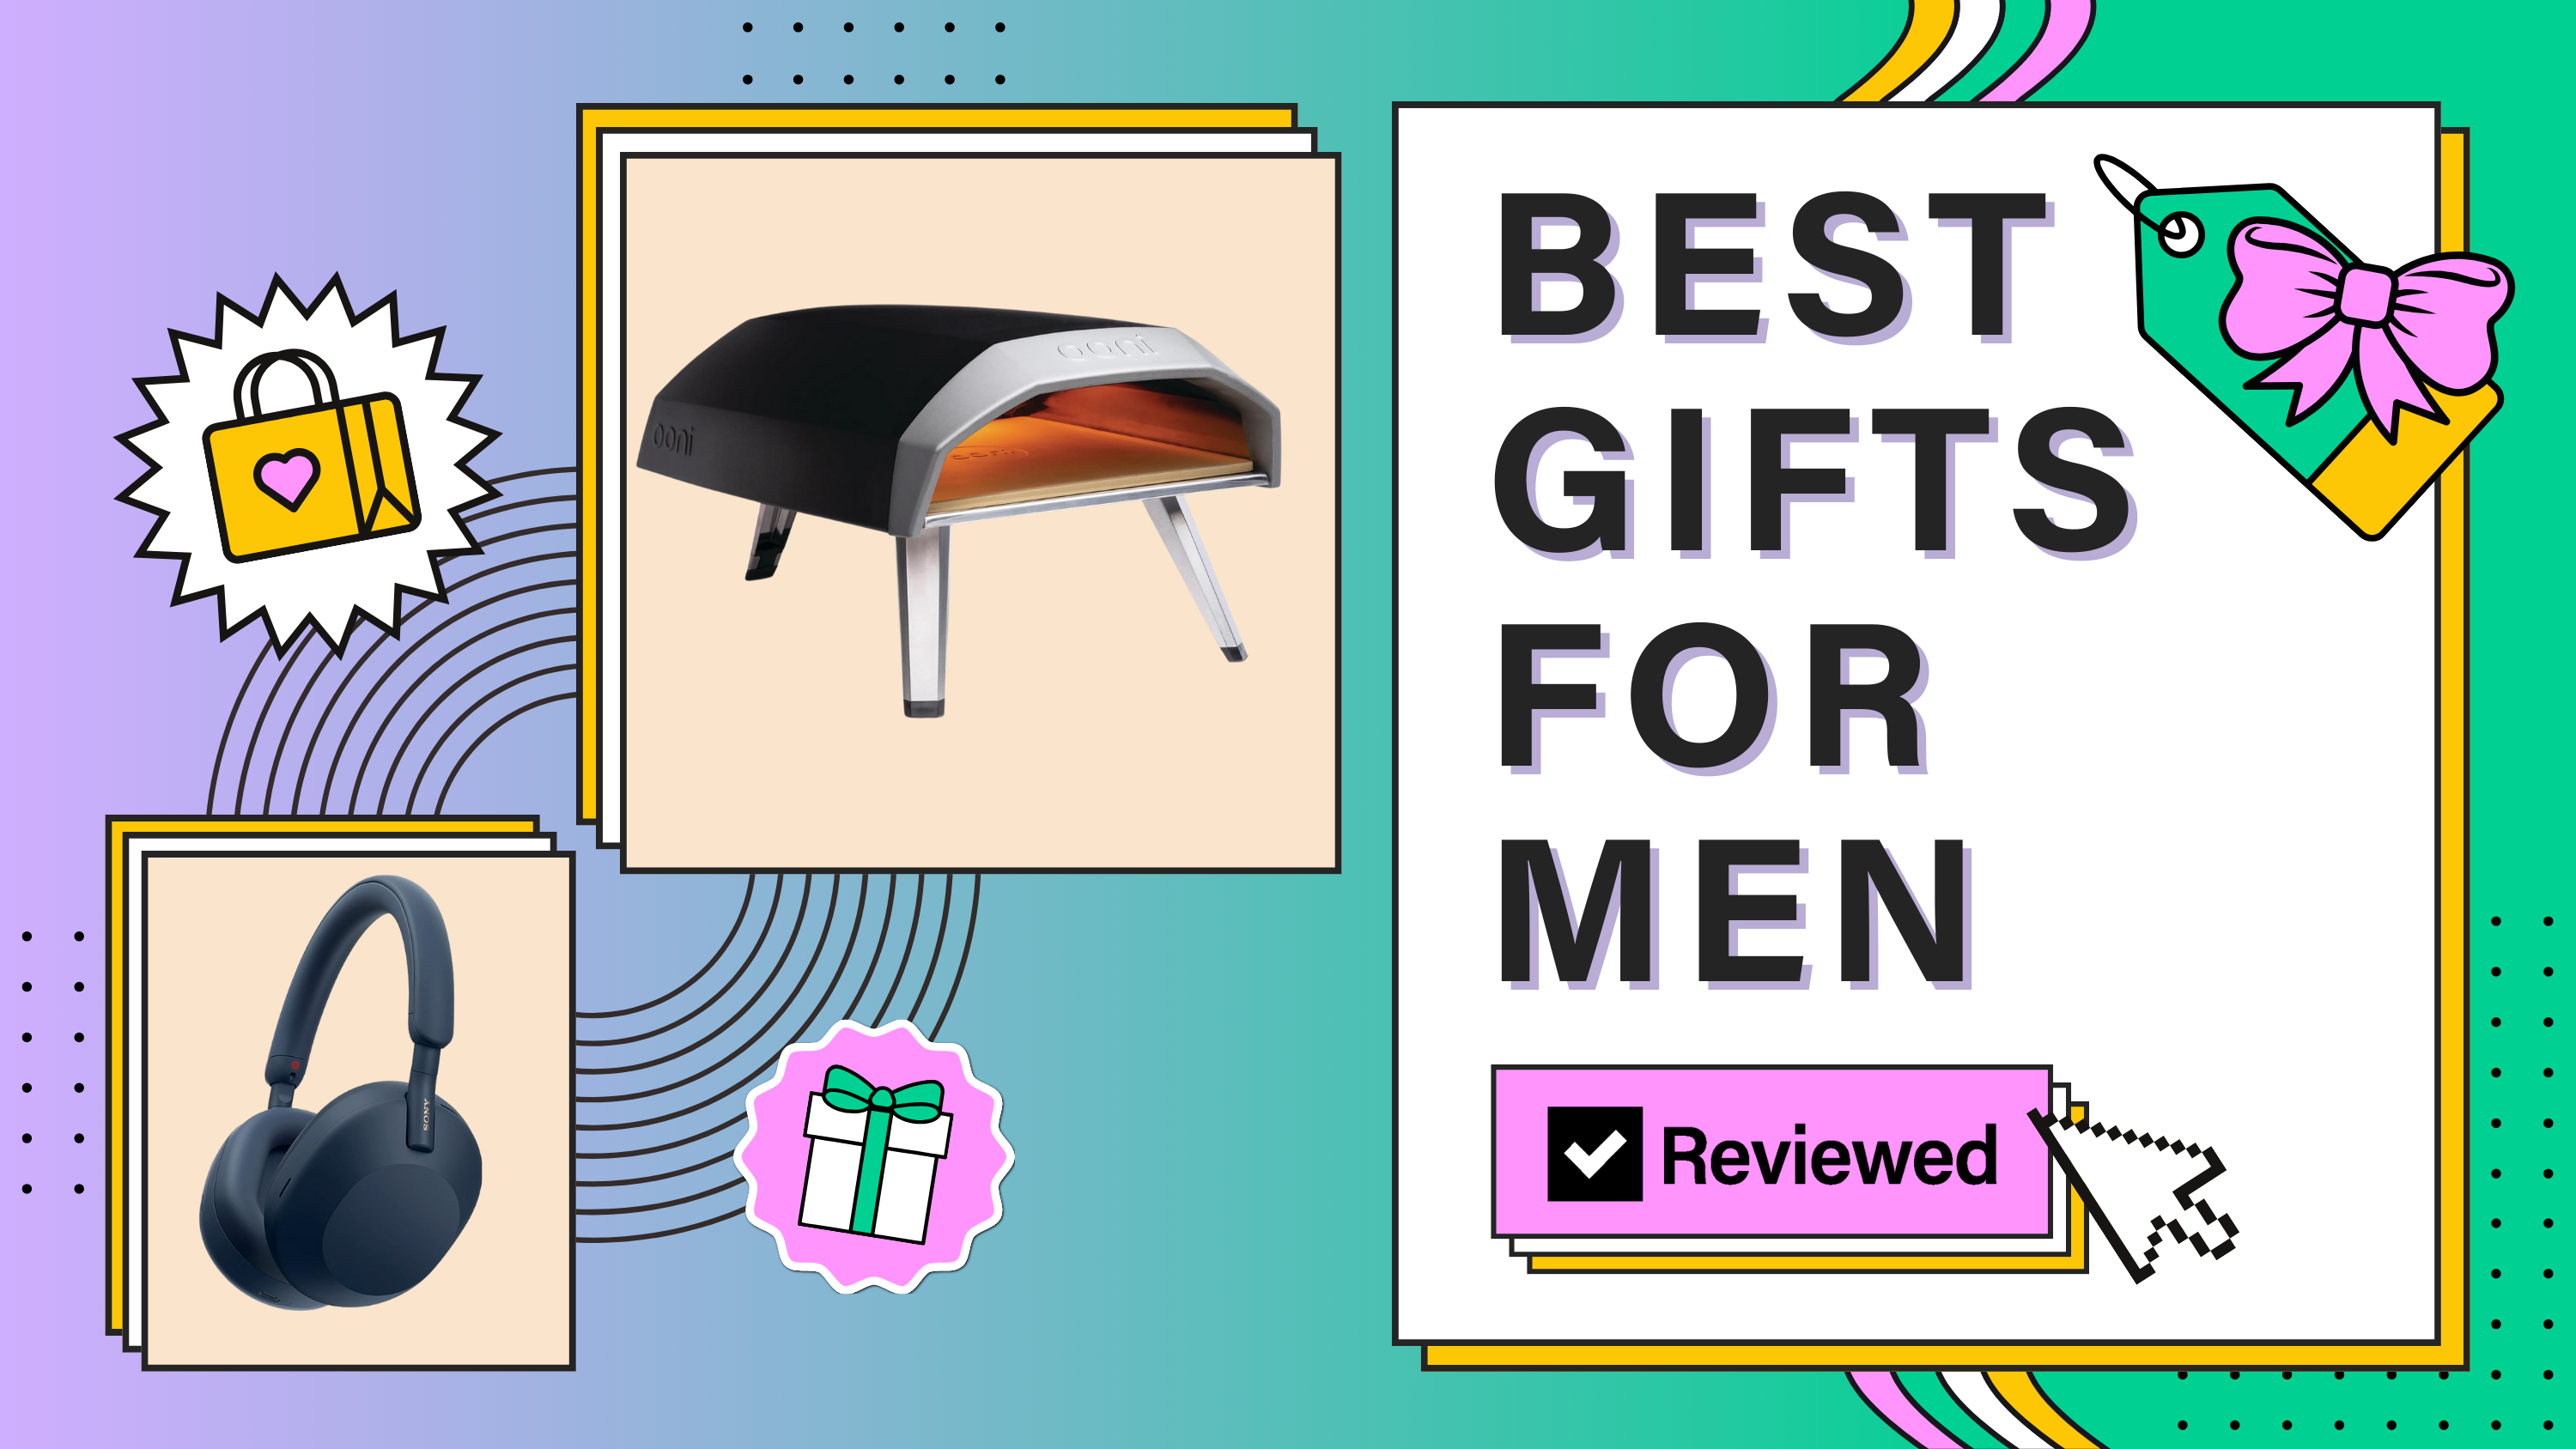 Best gifts for men: apparel, accessories, tech, and more that will please the special man in your life.